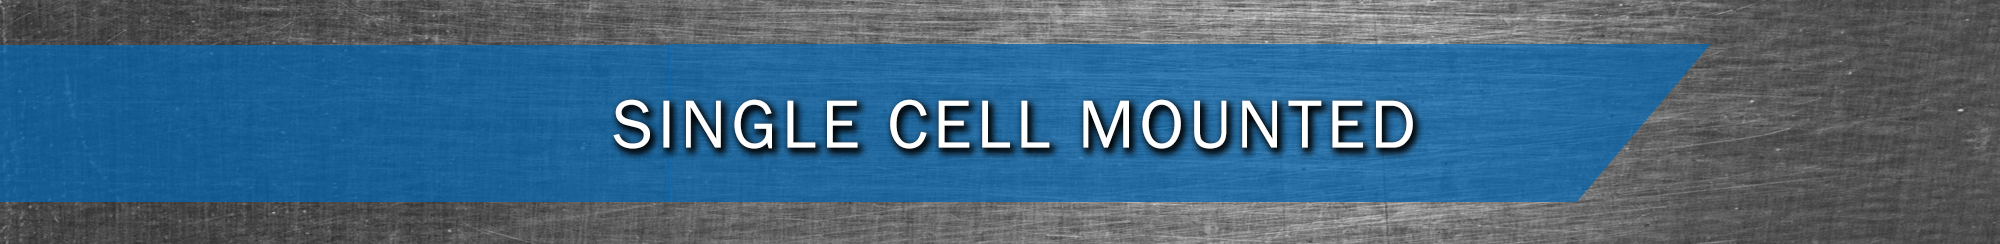 Single Cell Mounted